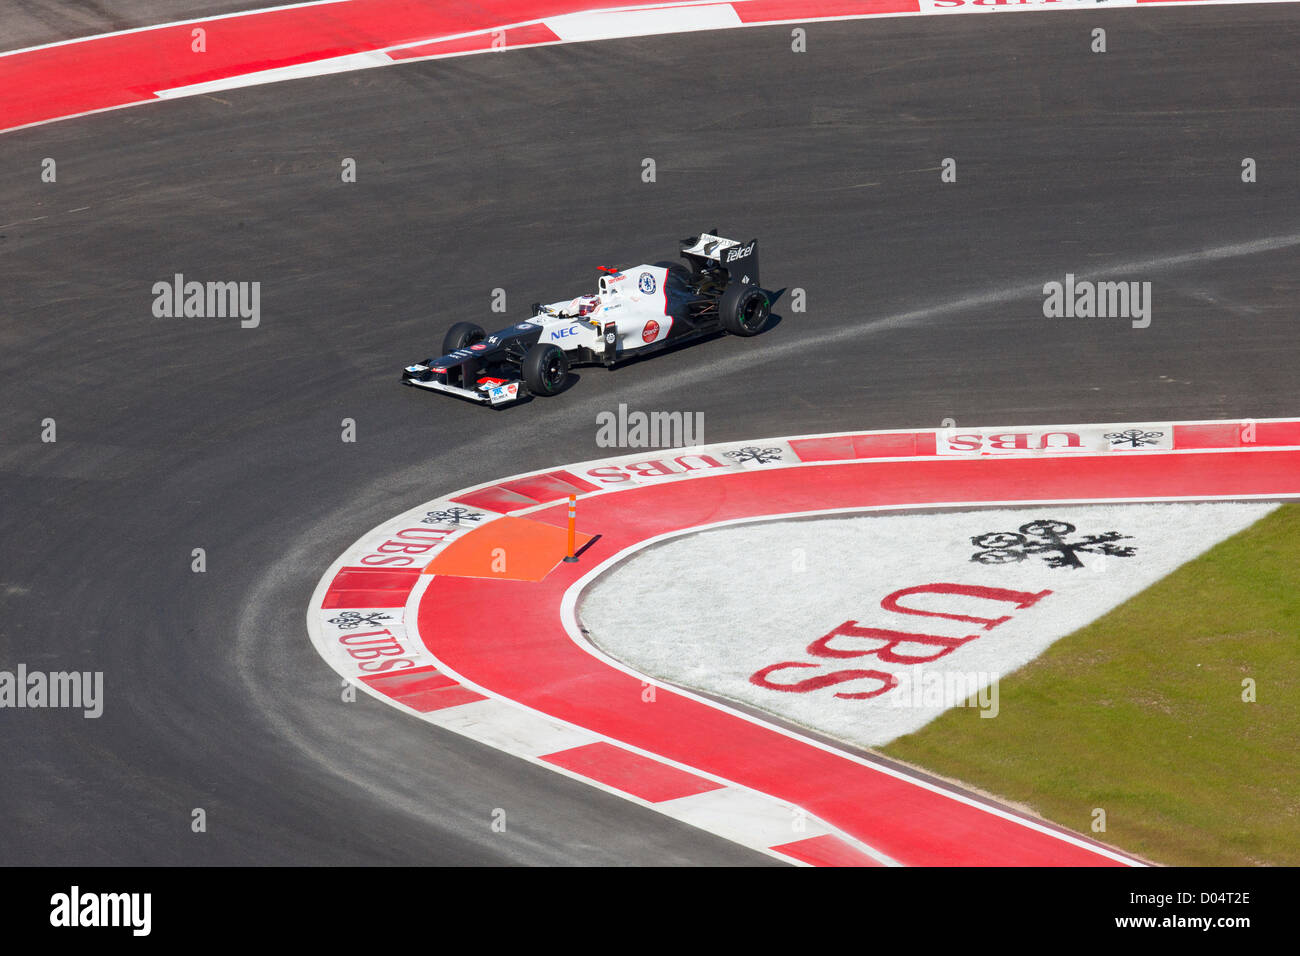 Kamui Kobayashi in the Sauber F1 car during practice for the Formula One United States Grand Prix at Circuit of the Americas Stock Photo